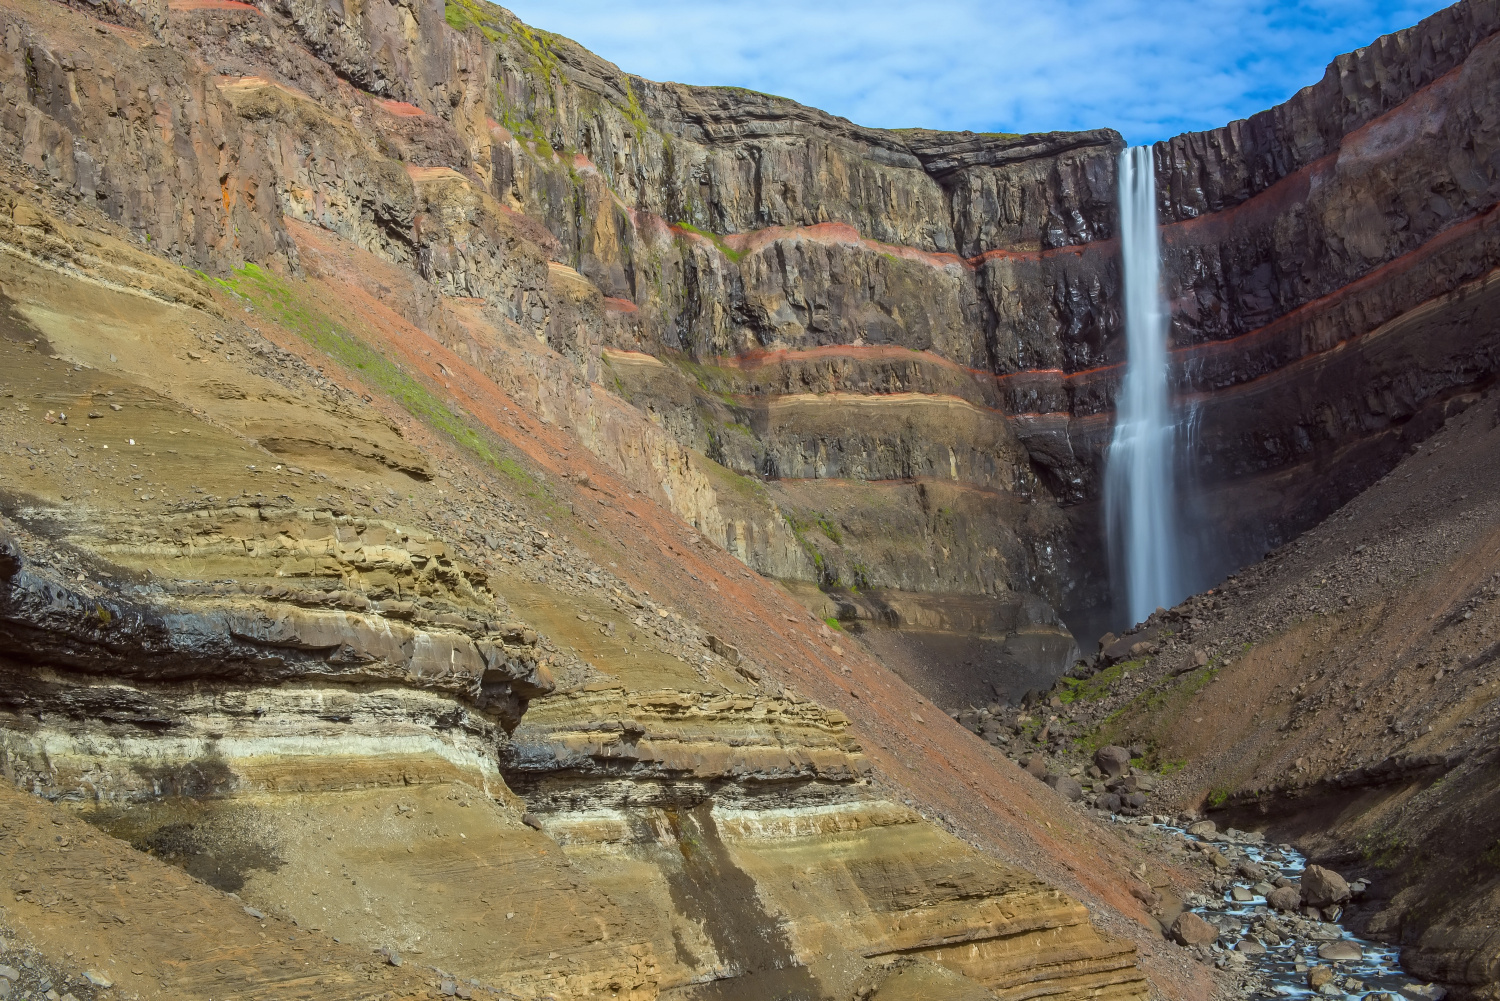 Hengifoss is the third highest waterfall in Iceland